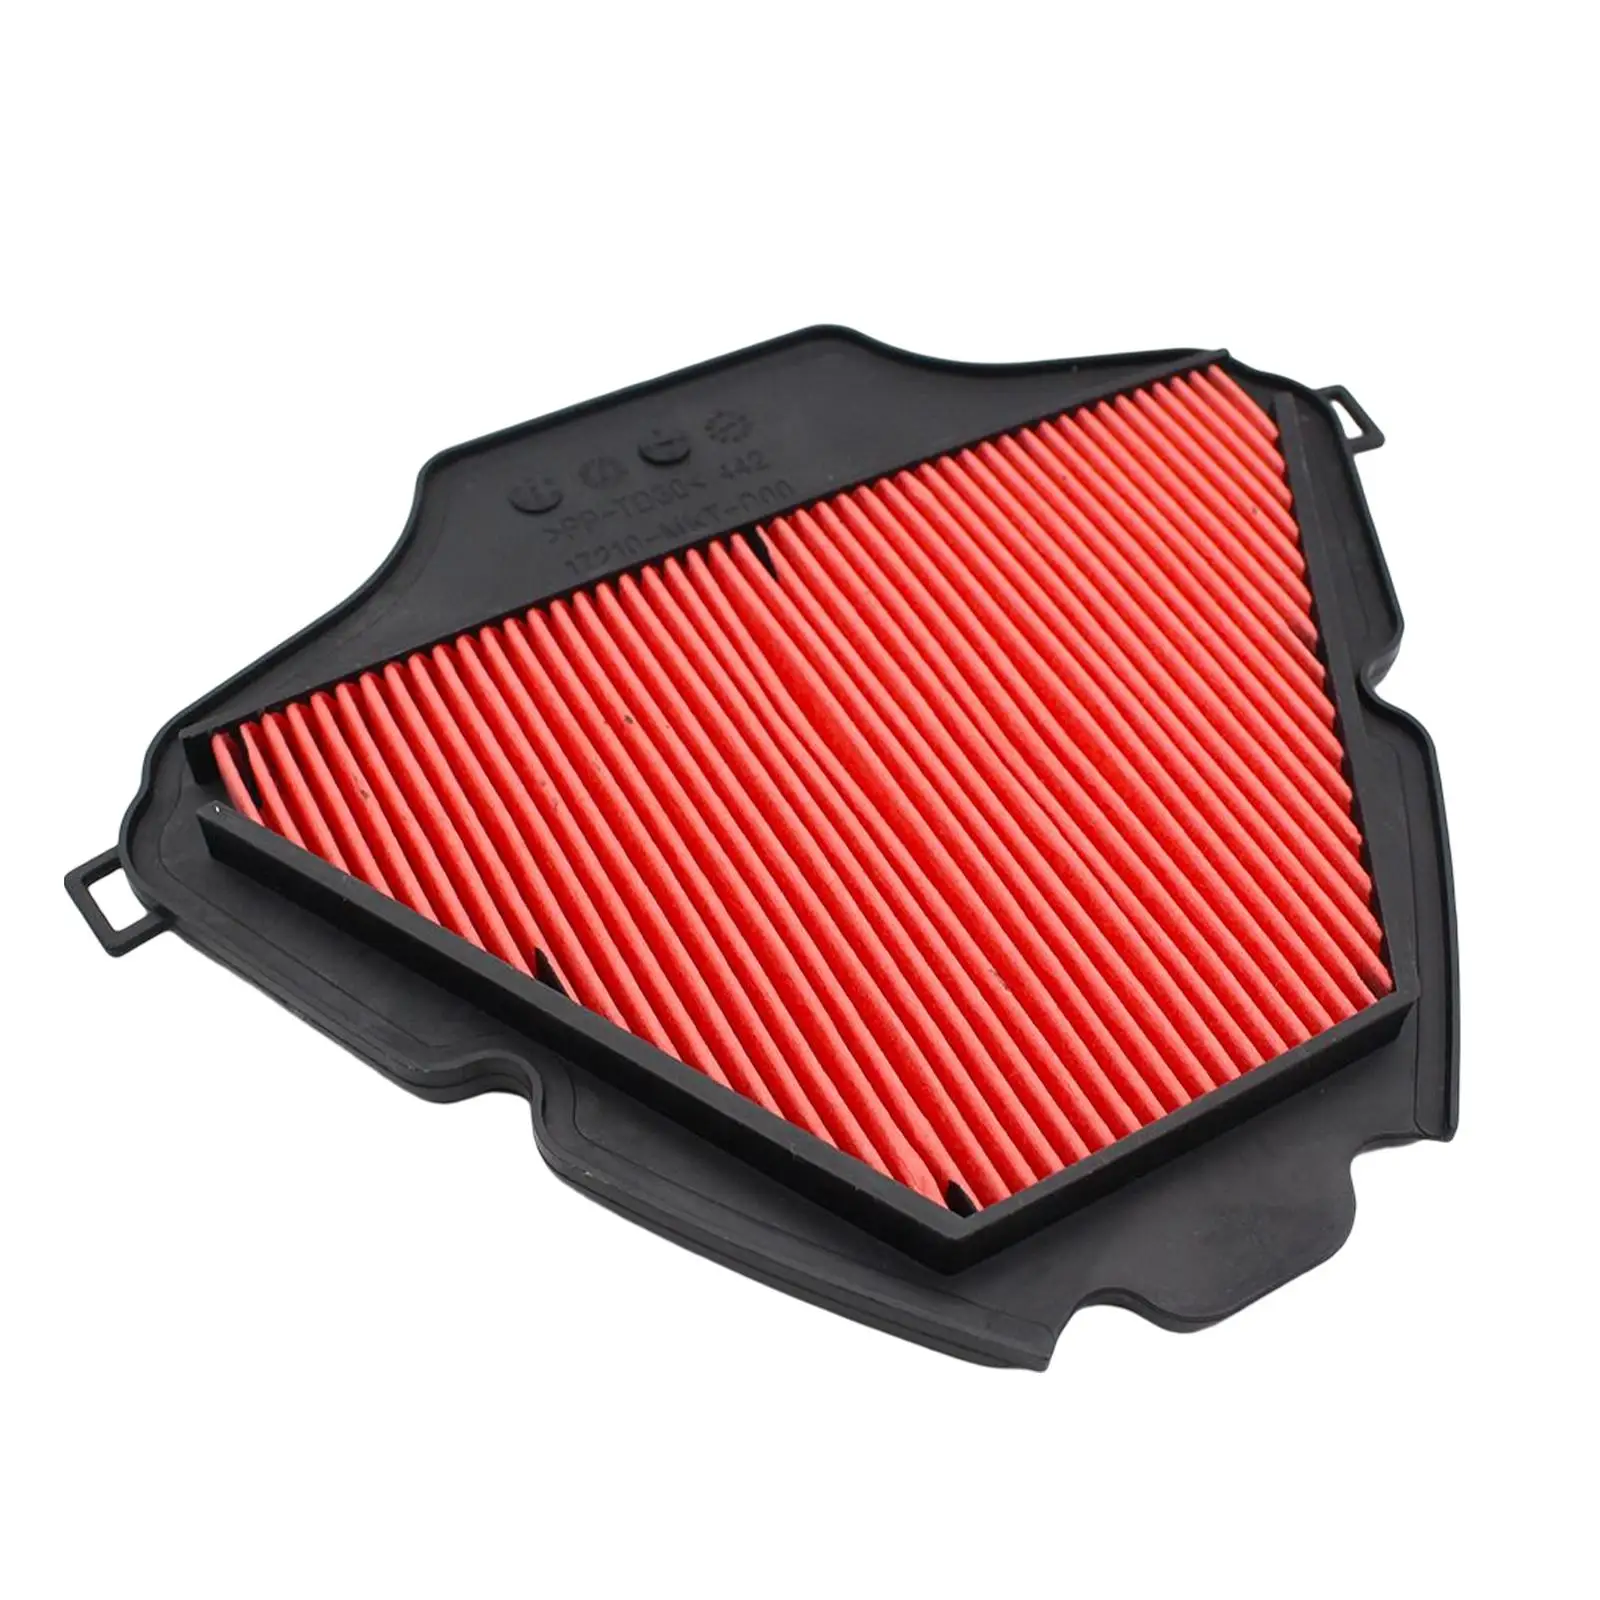 Intake Cleaner Durable Practical Portable Accessories for Honda